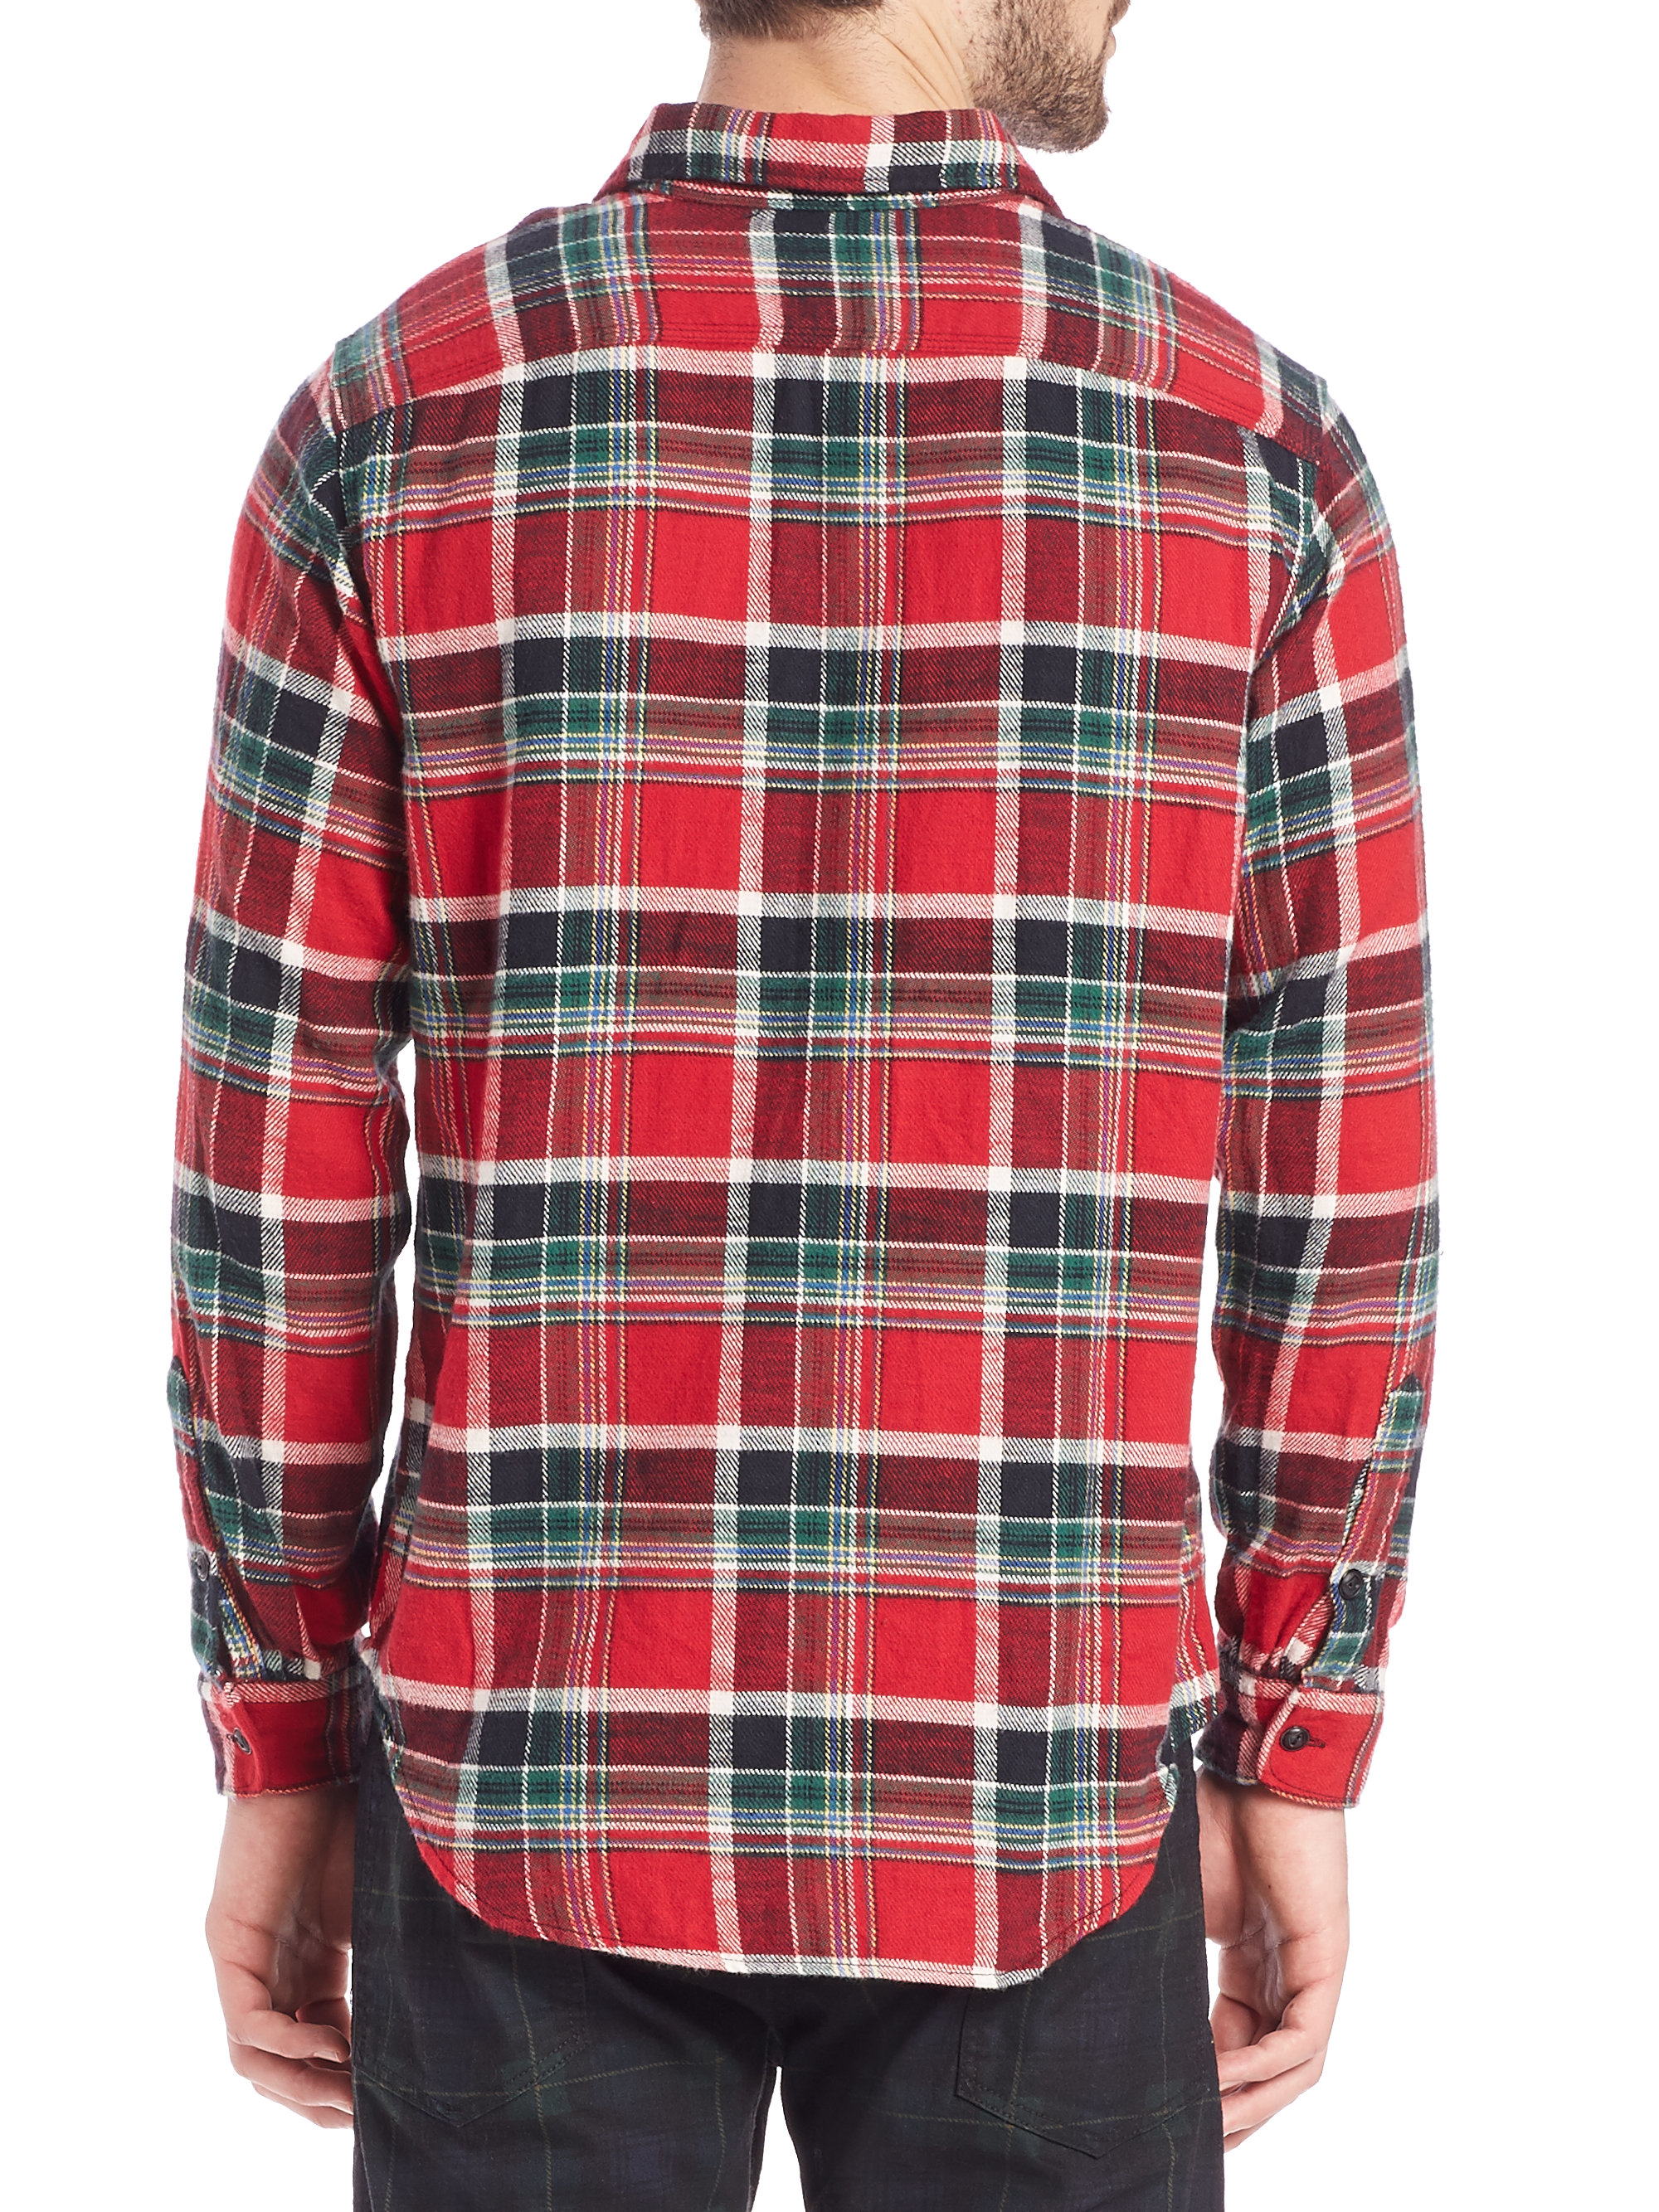 Lyst - Polo Ralph Lauren Plaid Twill Workshirt in Red for Men